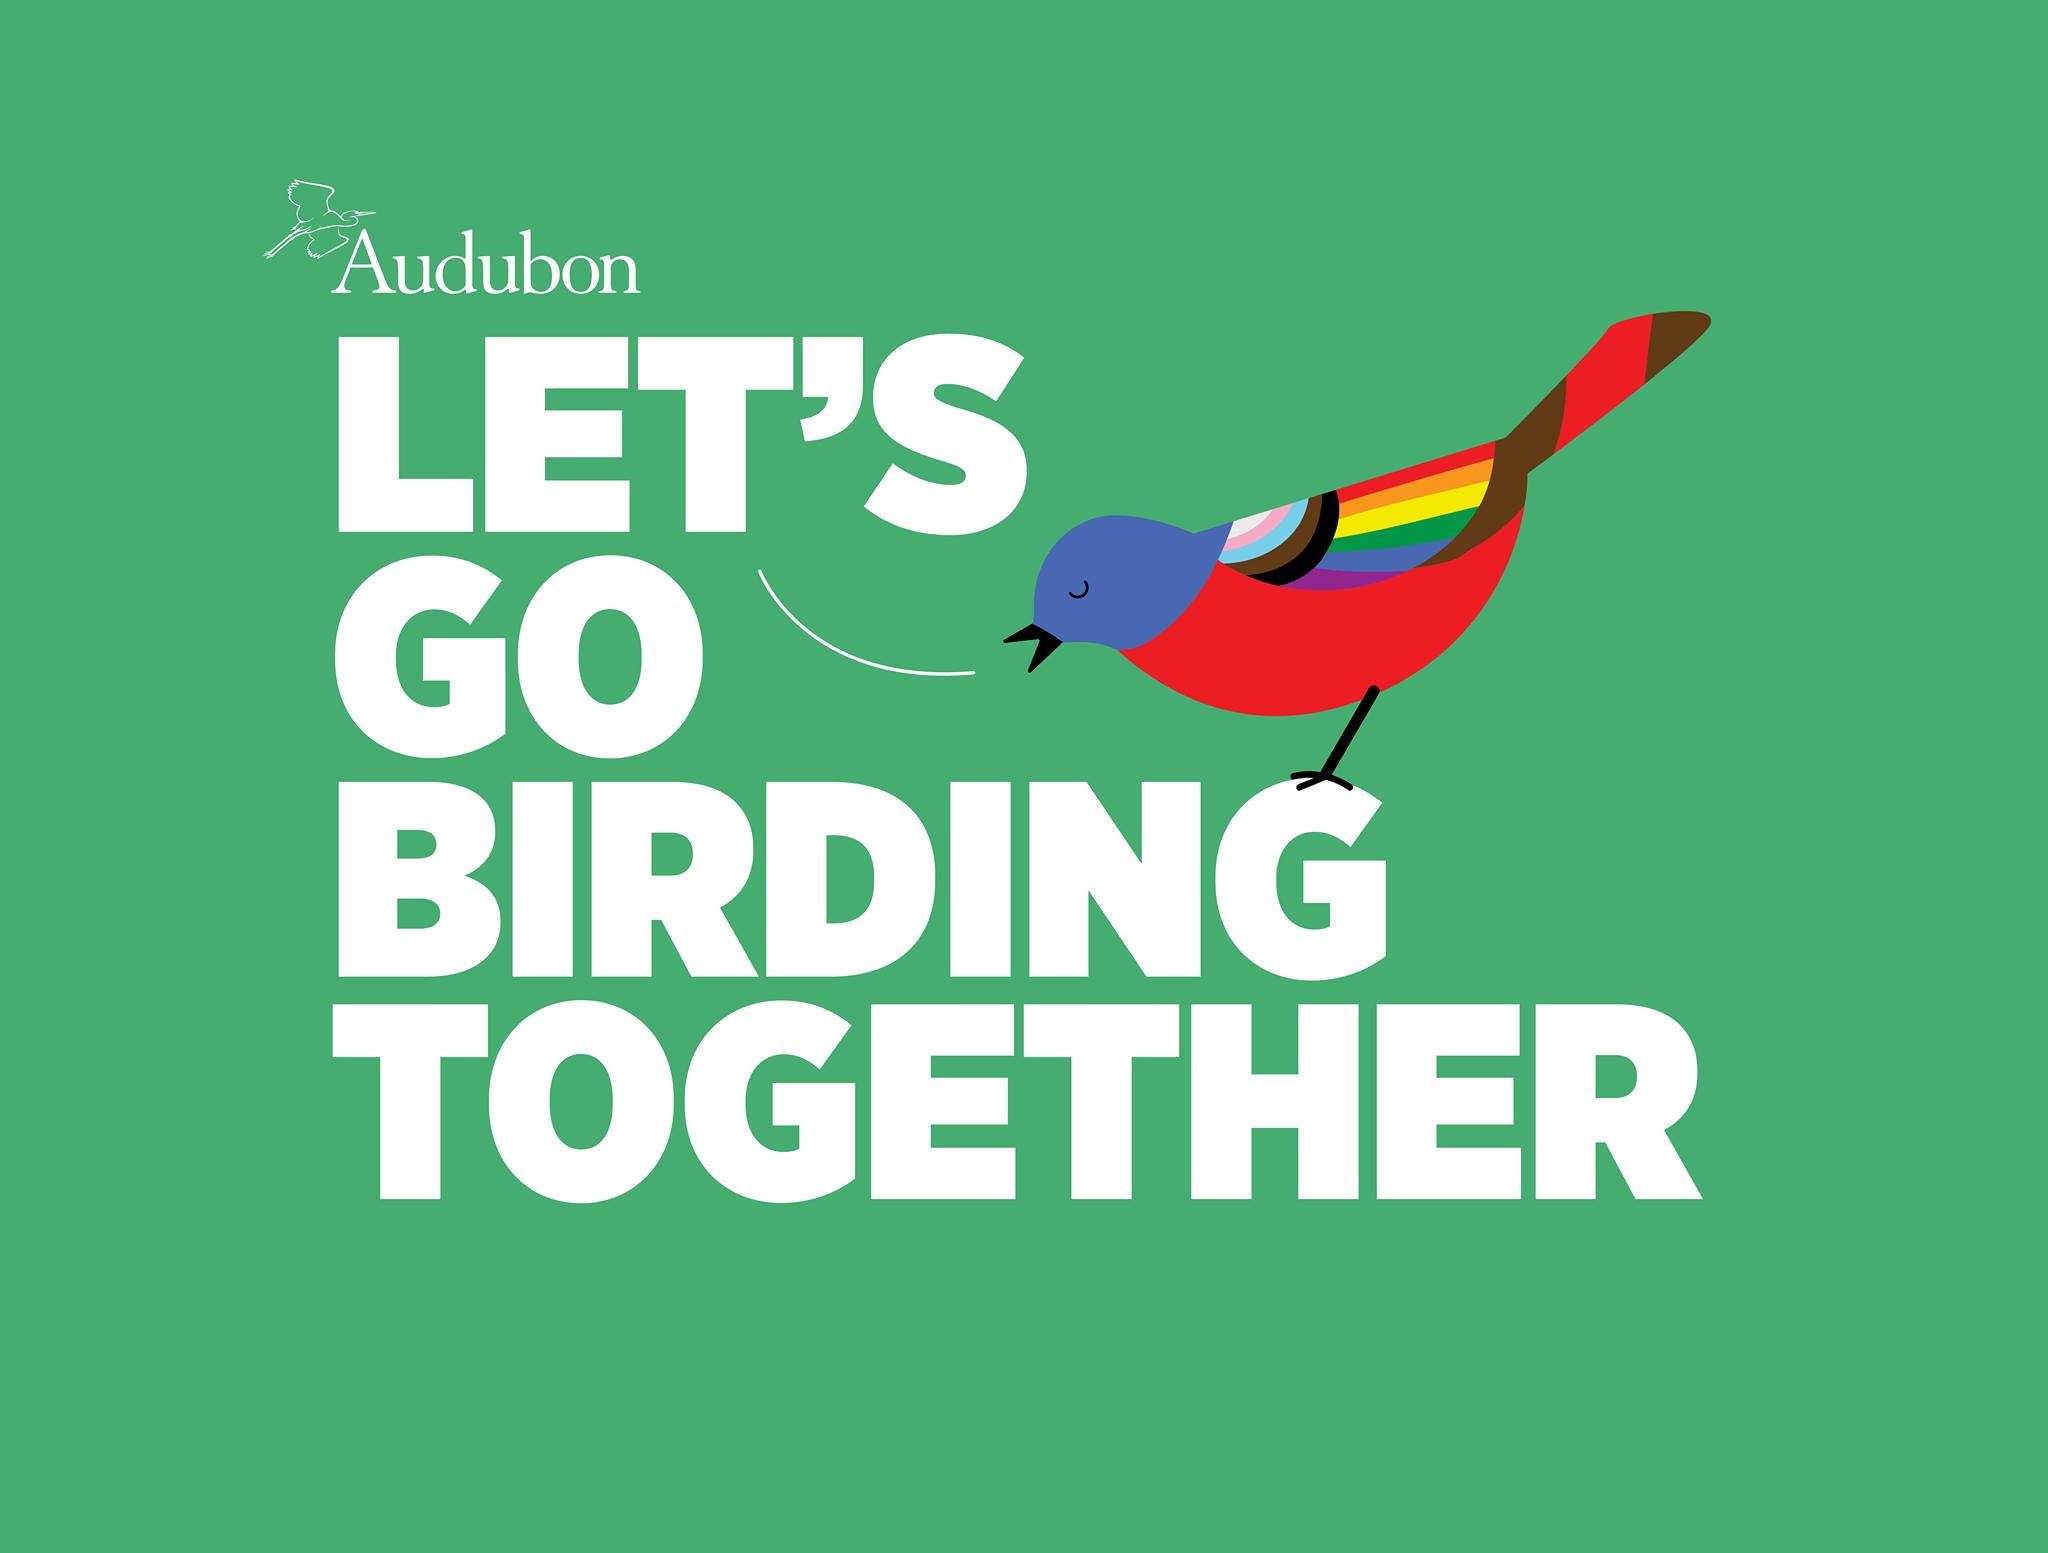 Green background; bird with rainbow coloring sitting on white, bold lettering that says "Let's Go Birding Together"